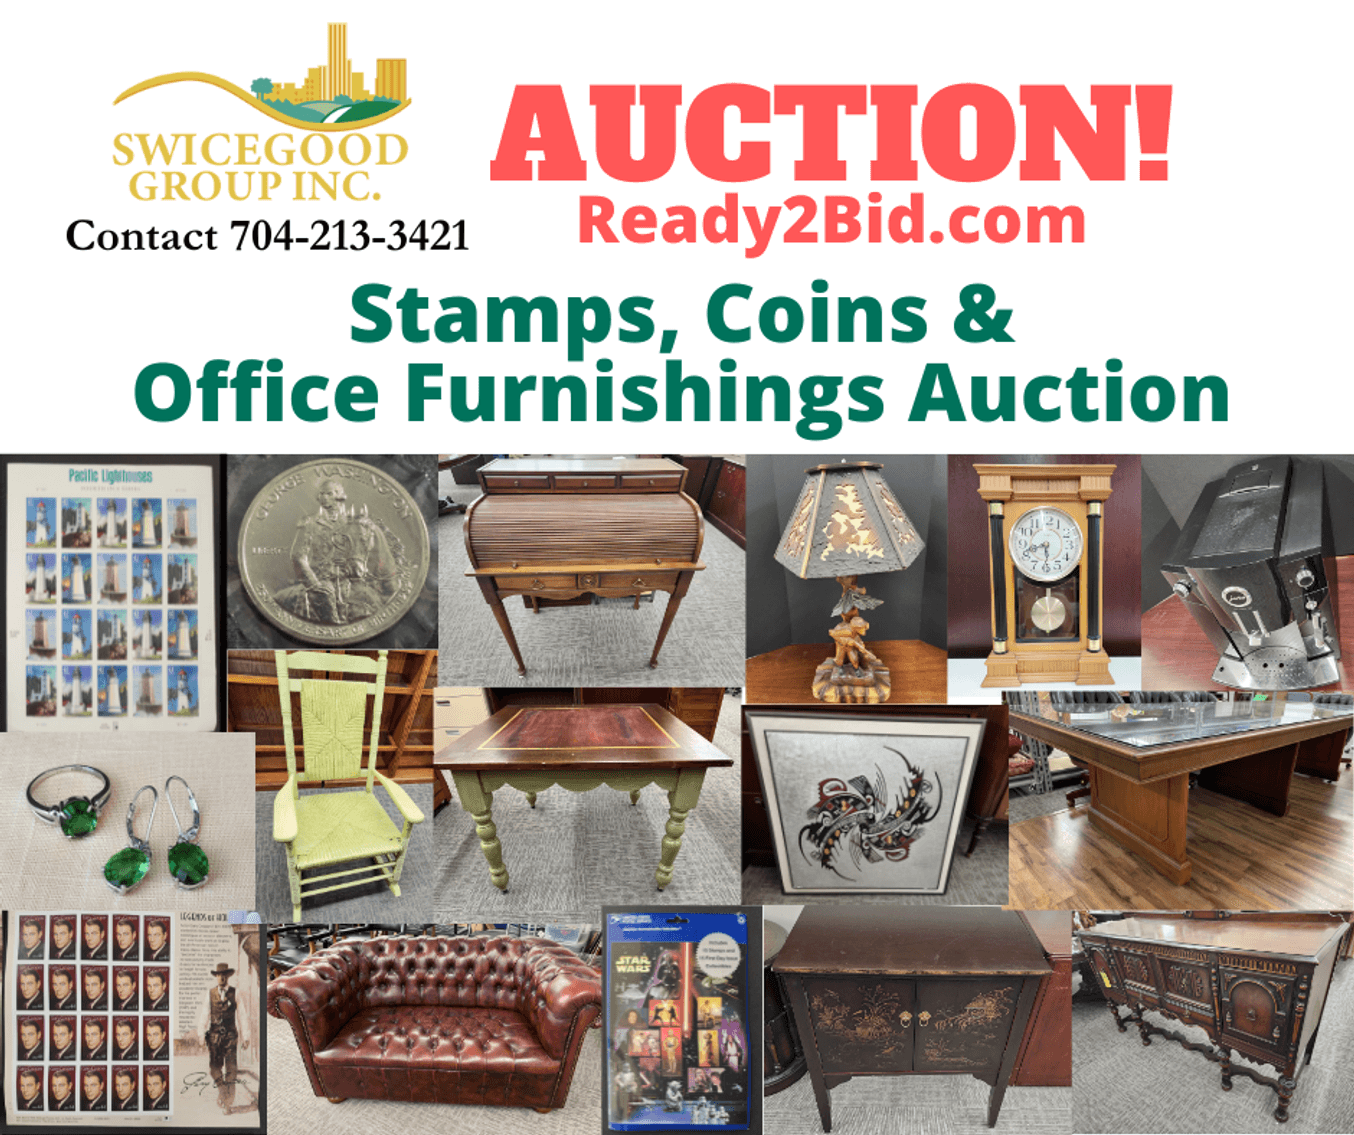 Stamps, Coins & Office Furnishings Auction